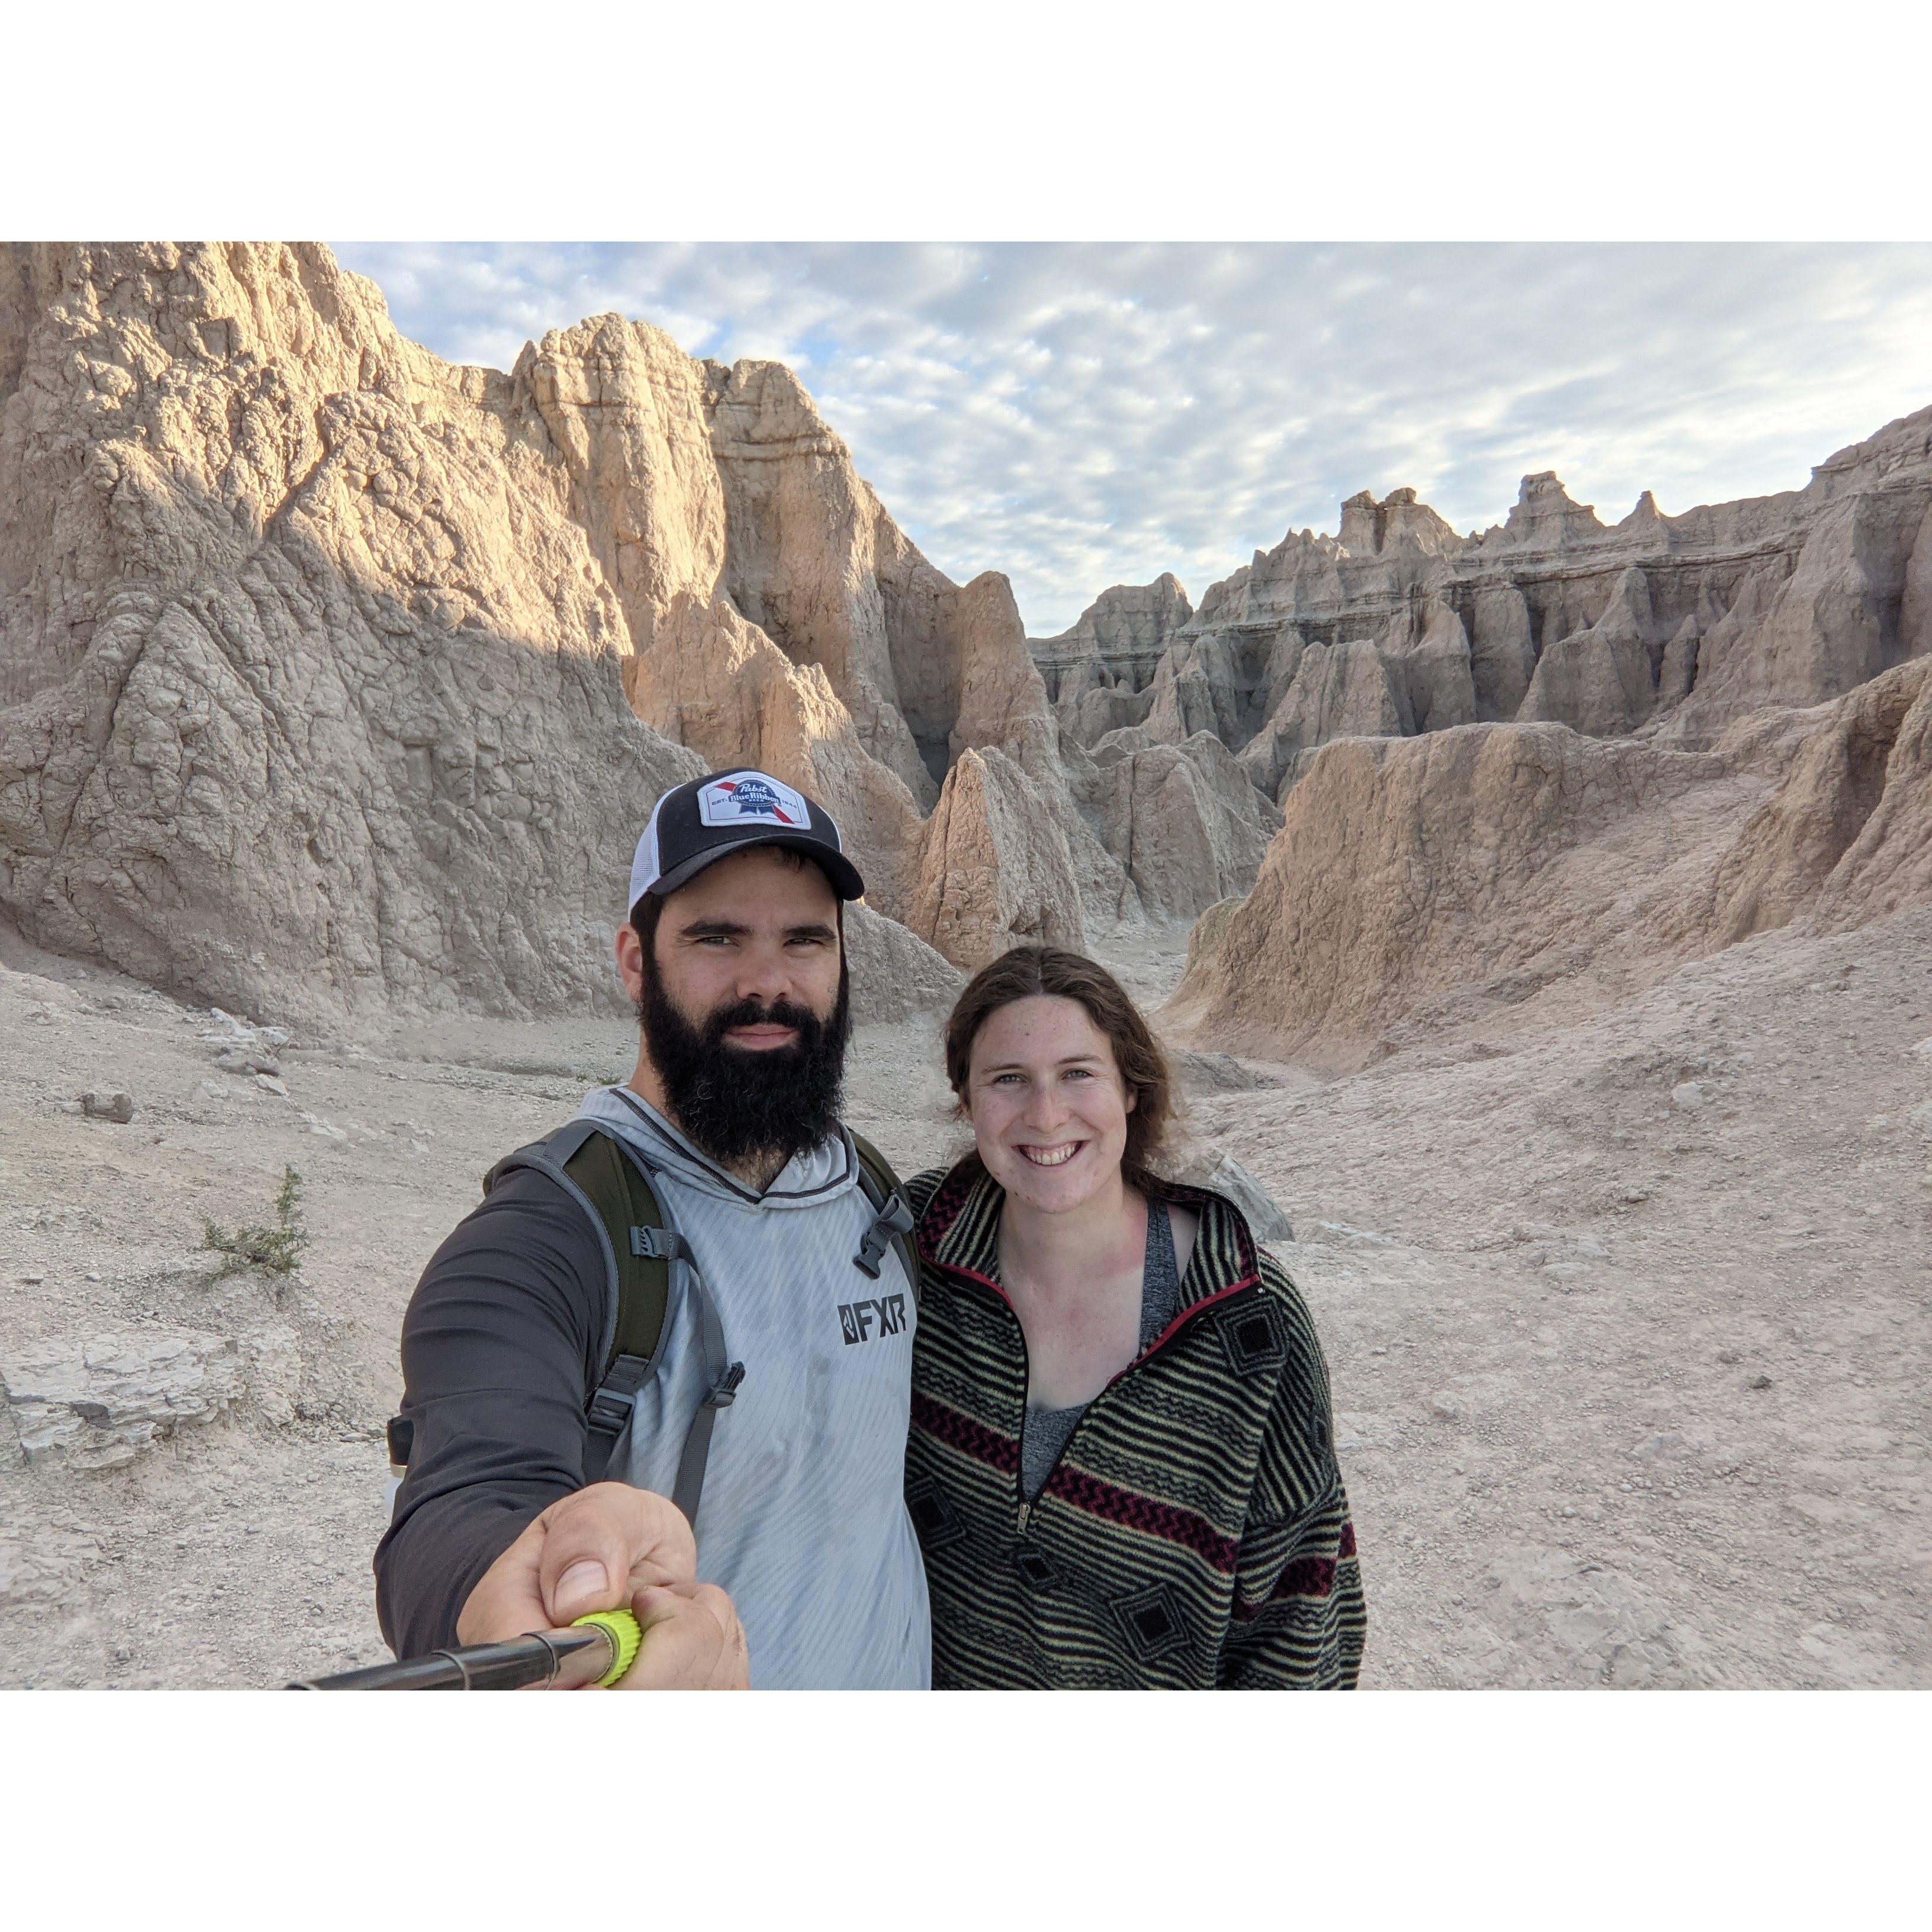 Hiking in the Badlands